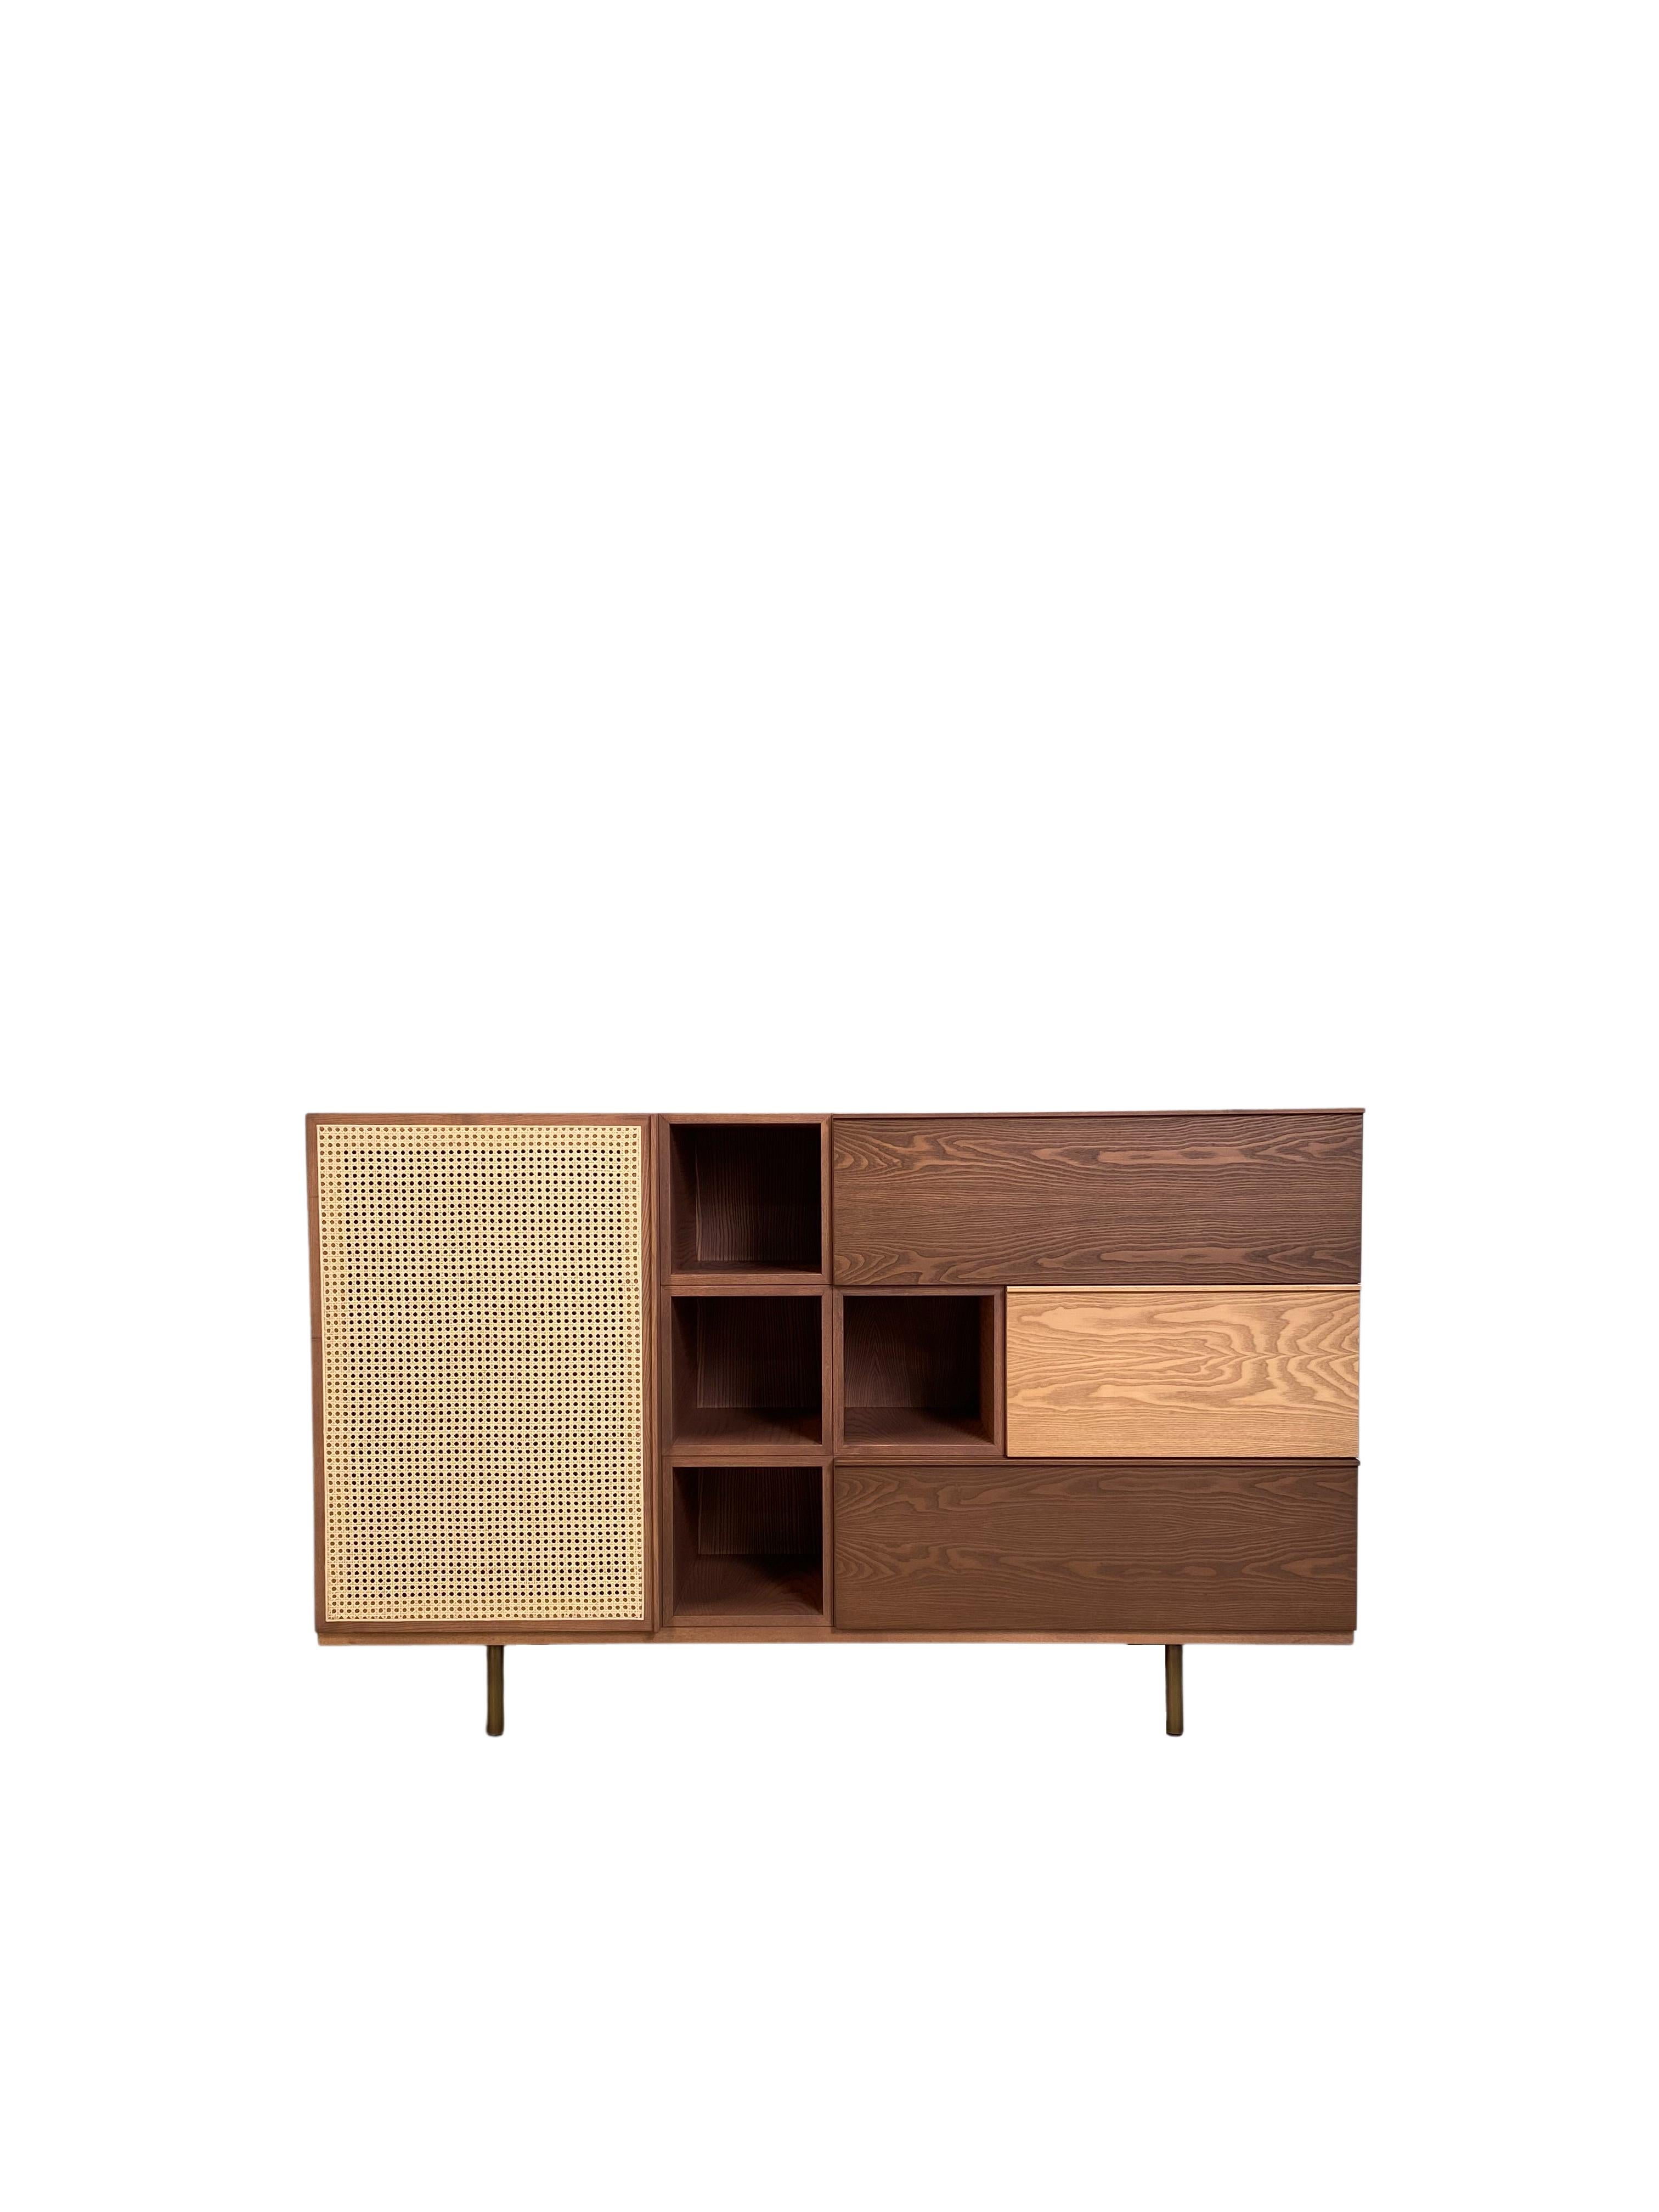 Morelato presents a new modular system with standing or hanging elements of different sizes, suitable to furnish many different spaces. Each element can be open, or with doors or drawers. The structure is made of ash wood in different color stains